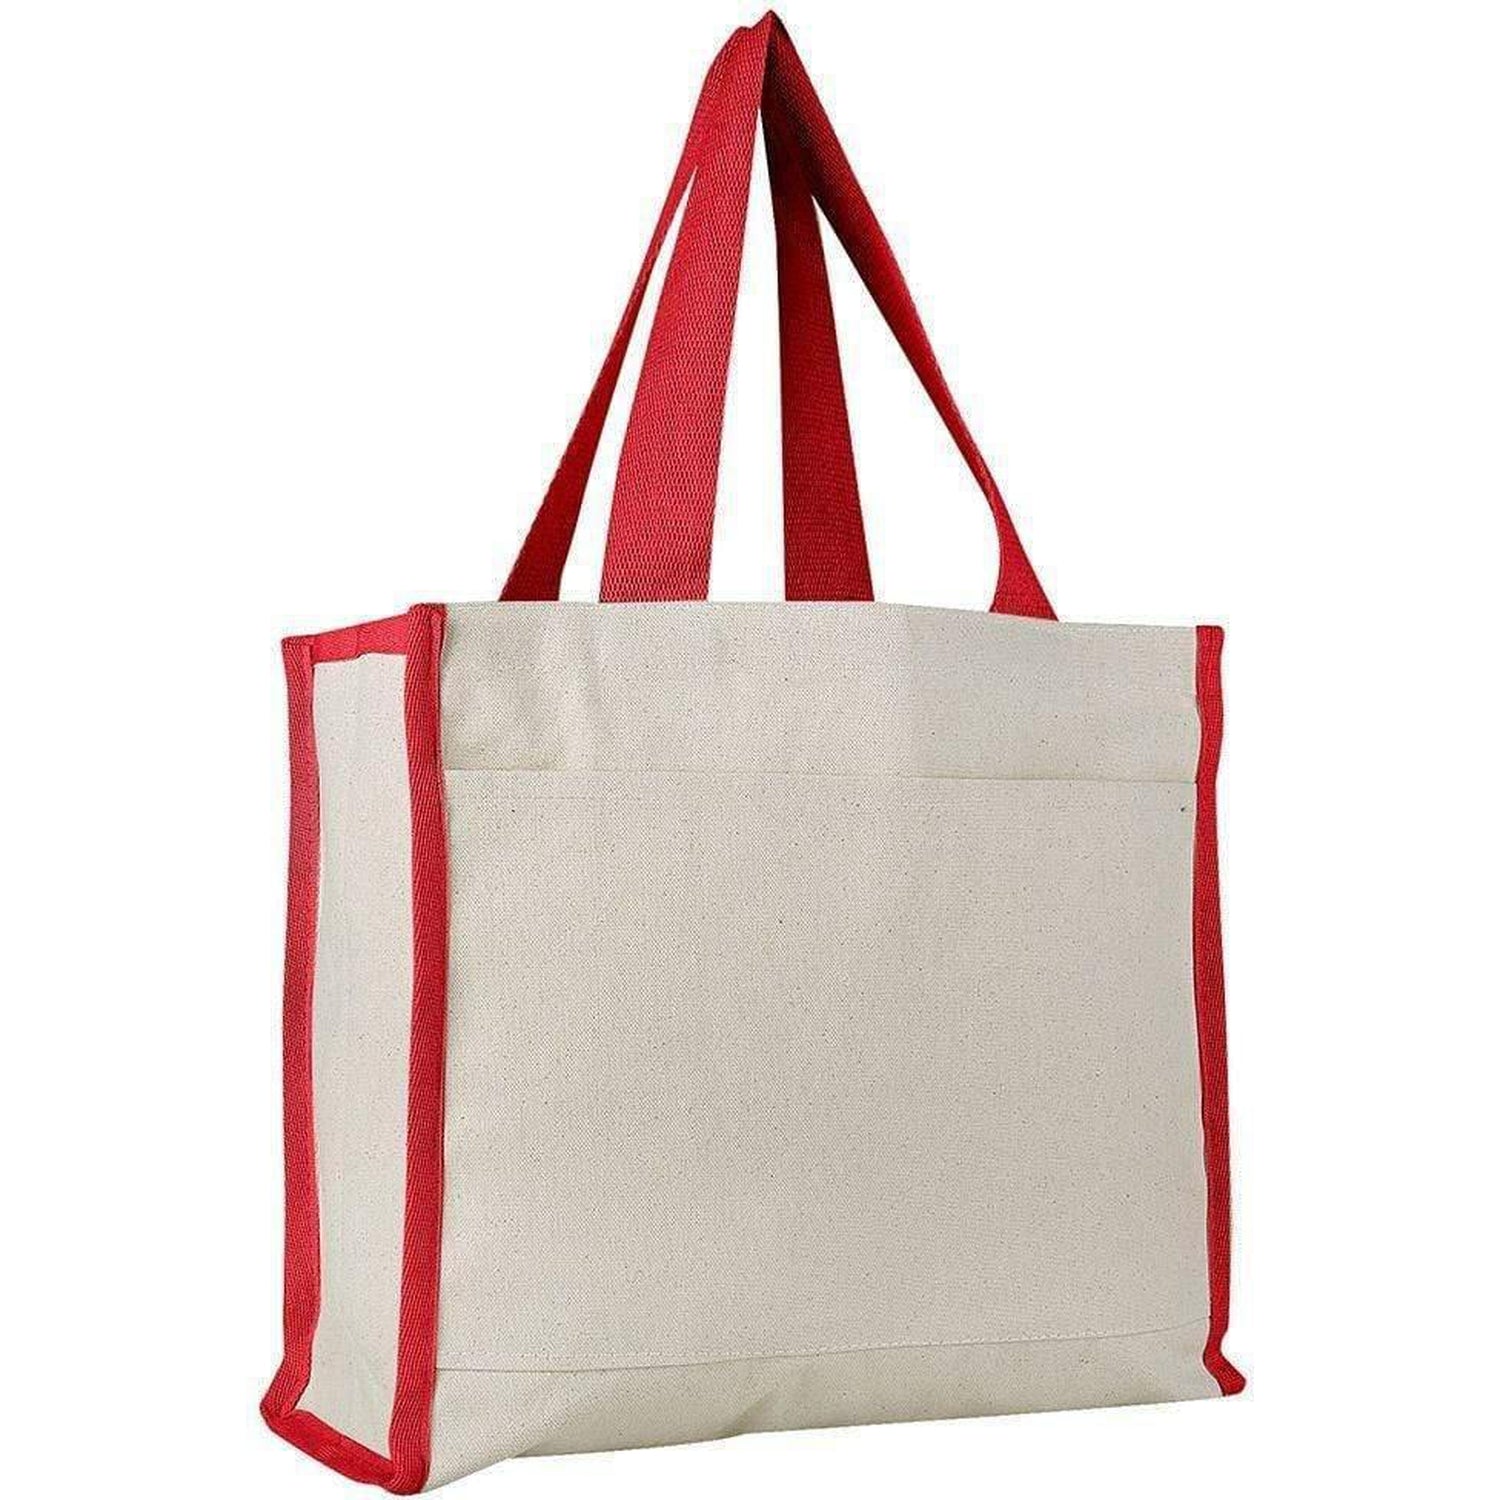 Wholesale Canvas Tote Bags with Front Pocket and Full Gusset – BagzDepot™